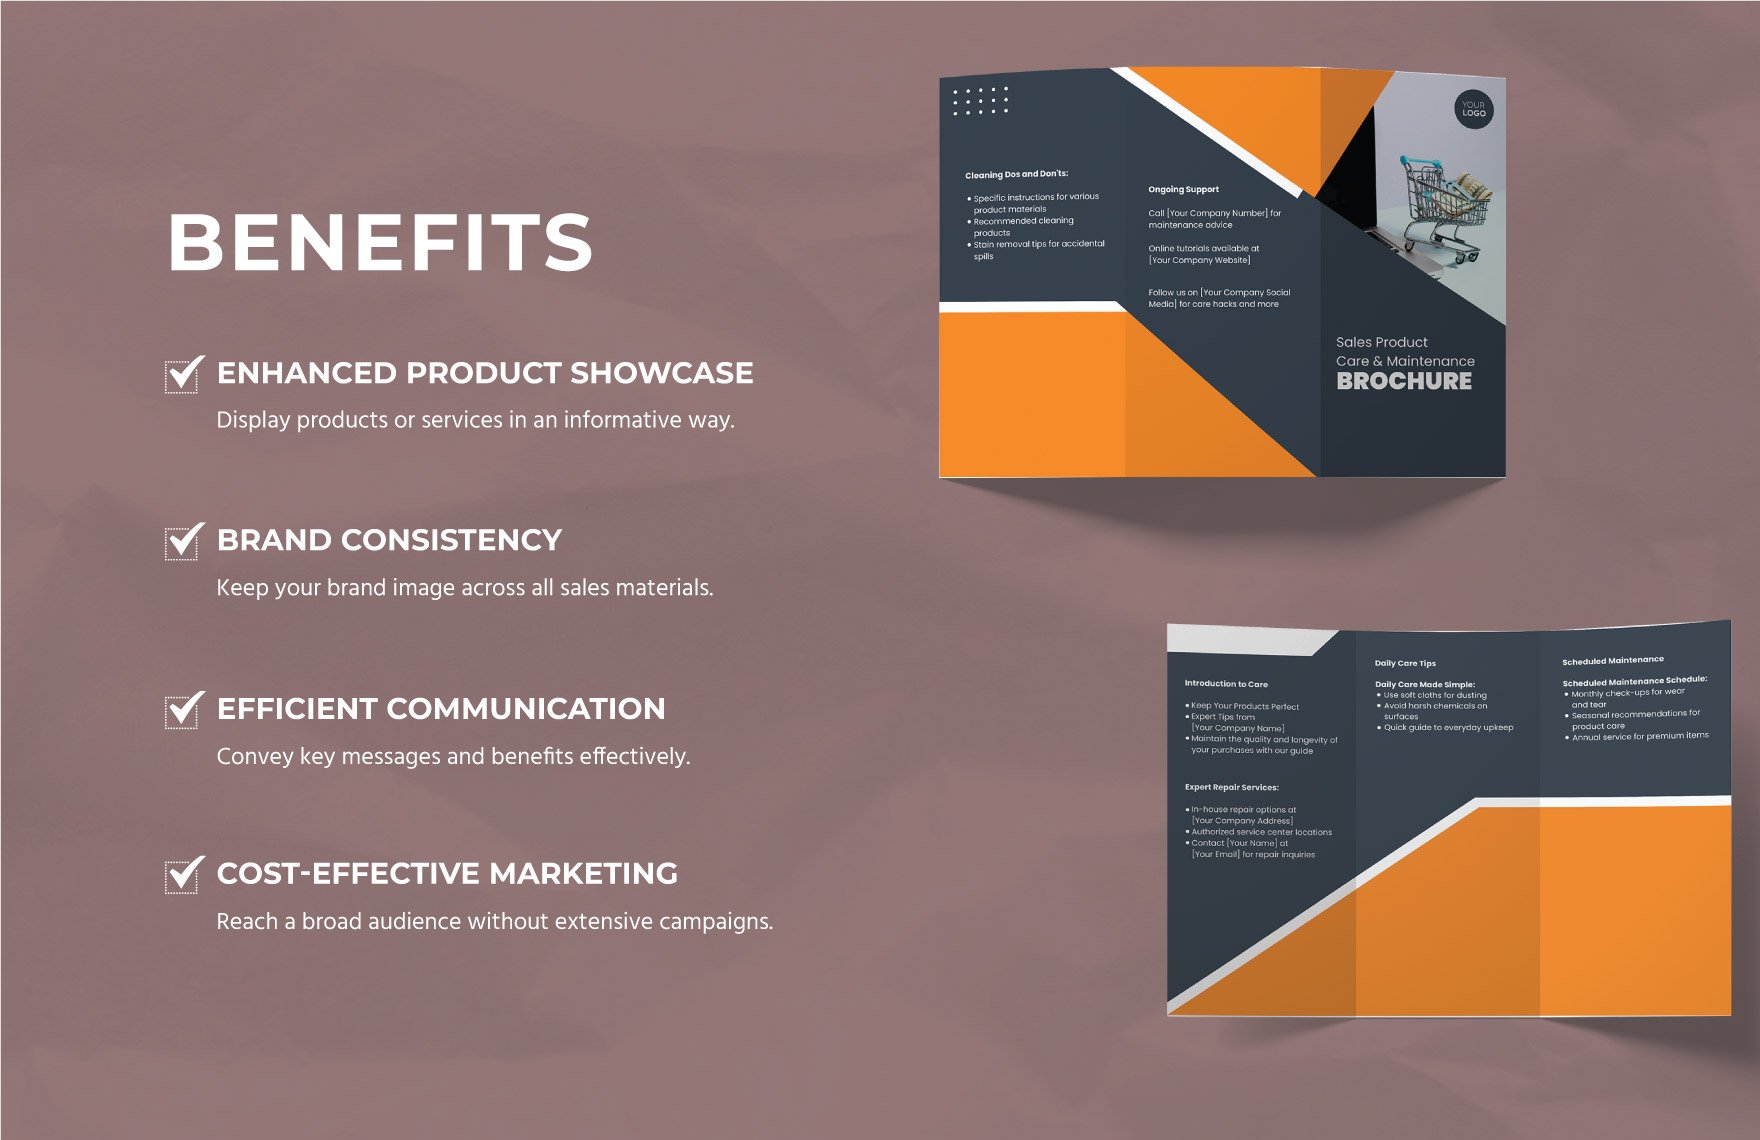 Sales Product Care and Maintenance Brochure Template